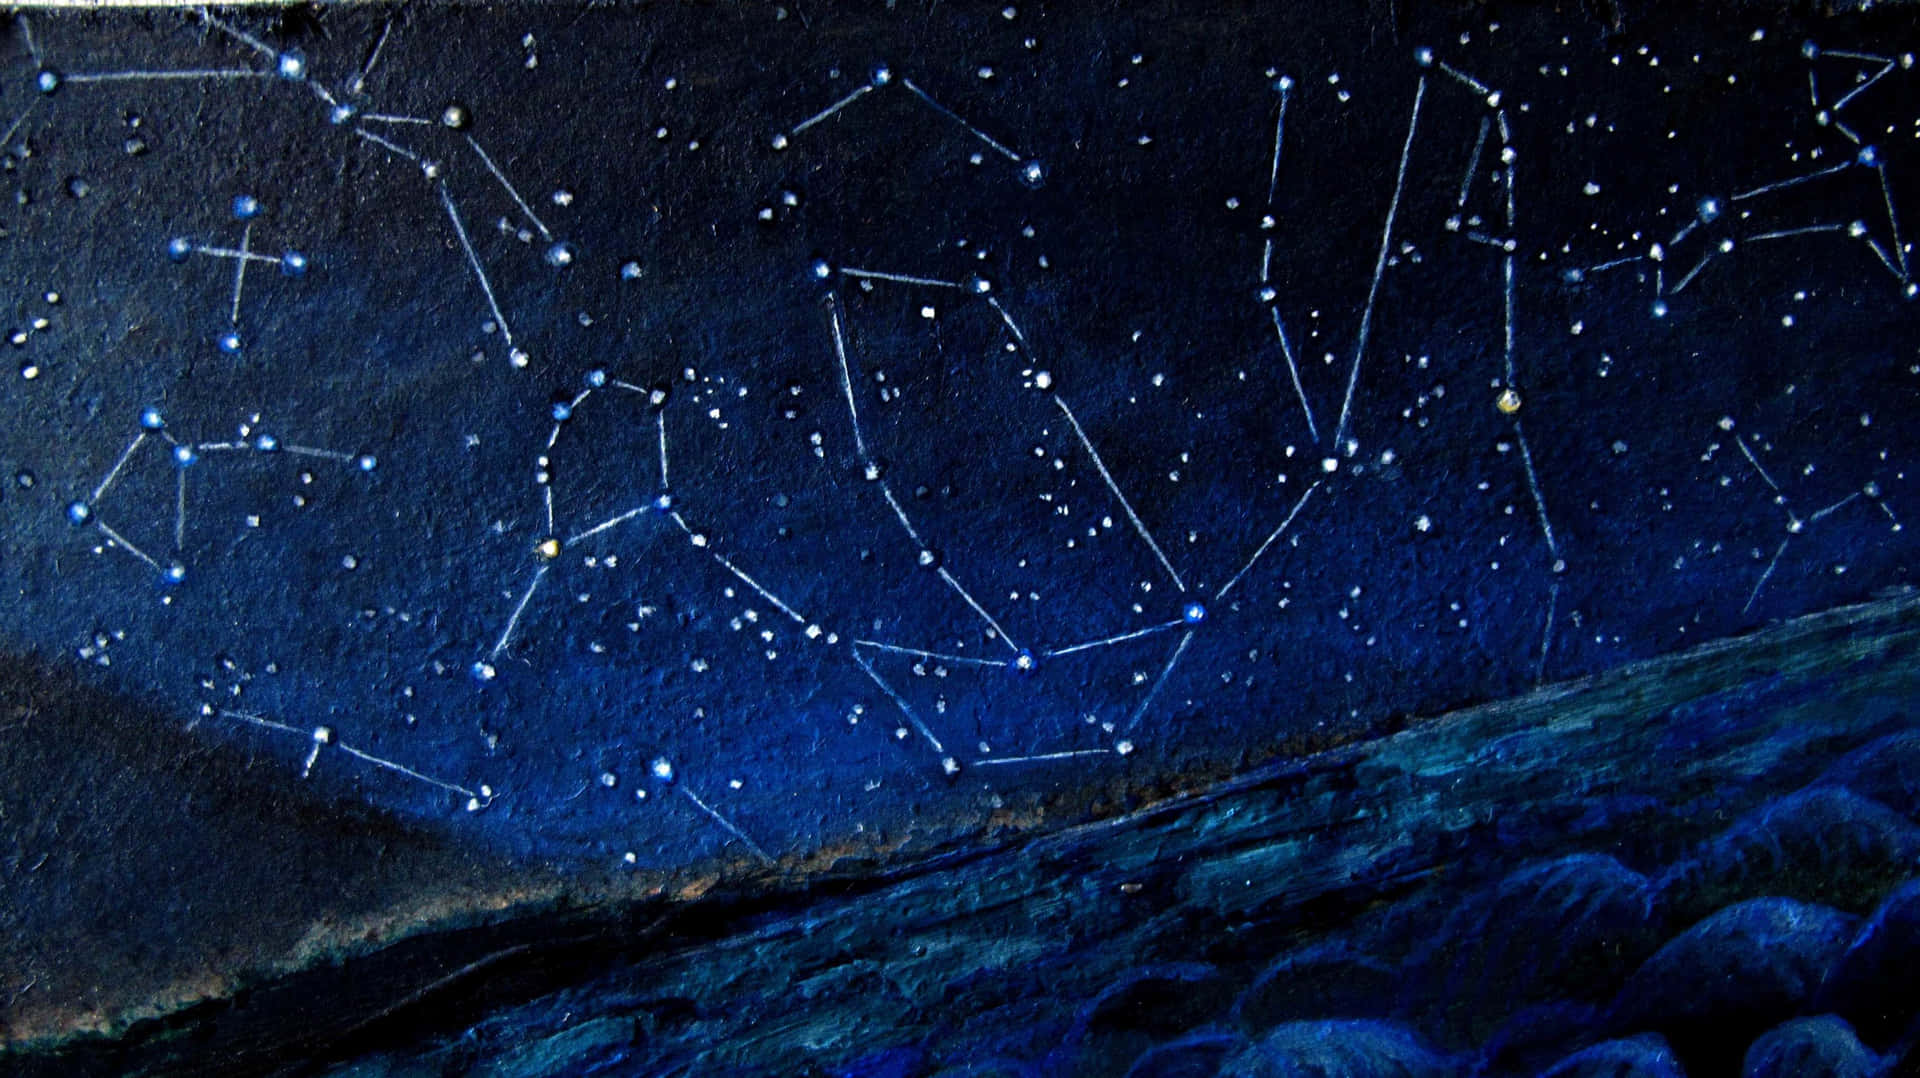 Visible Constellation Painting Wallpaper